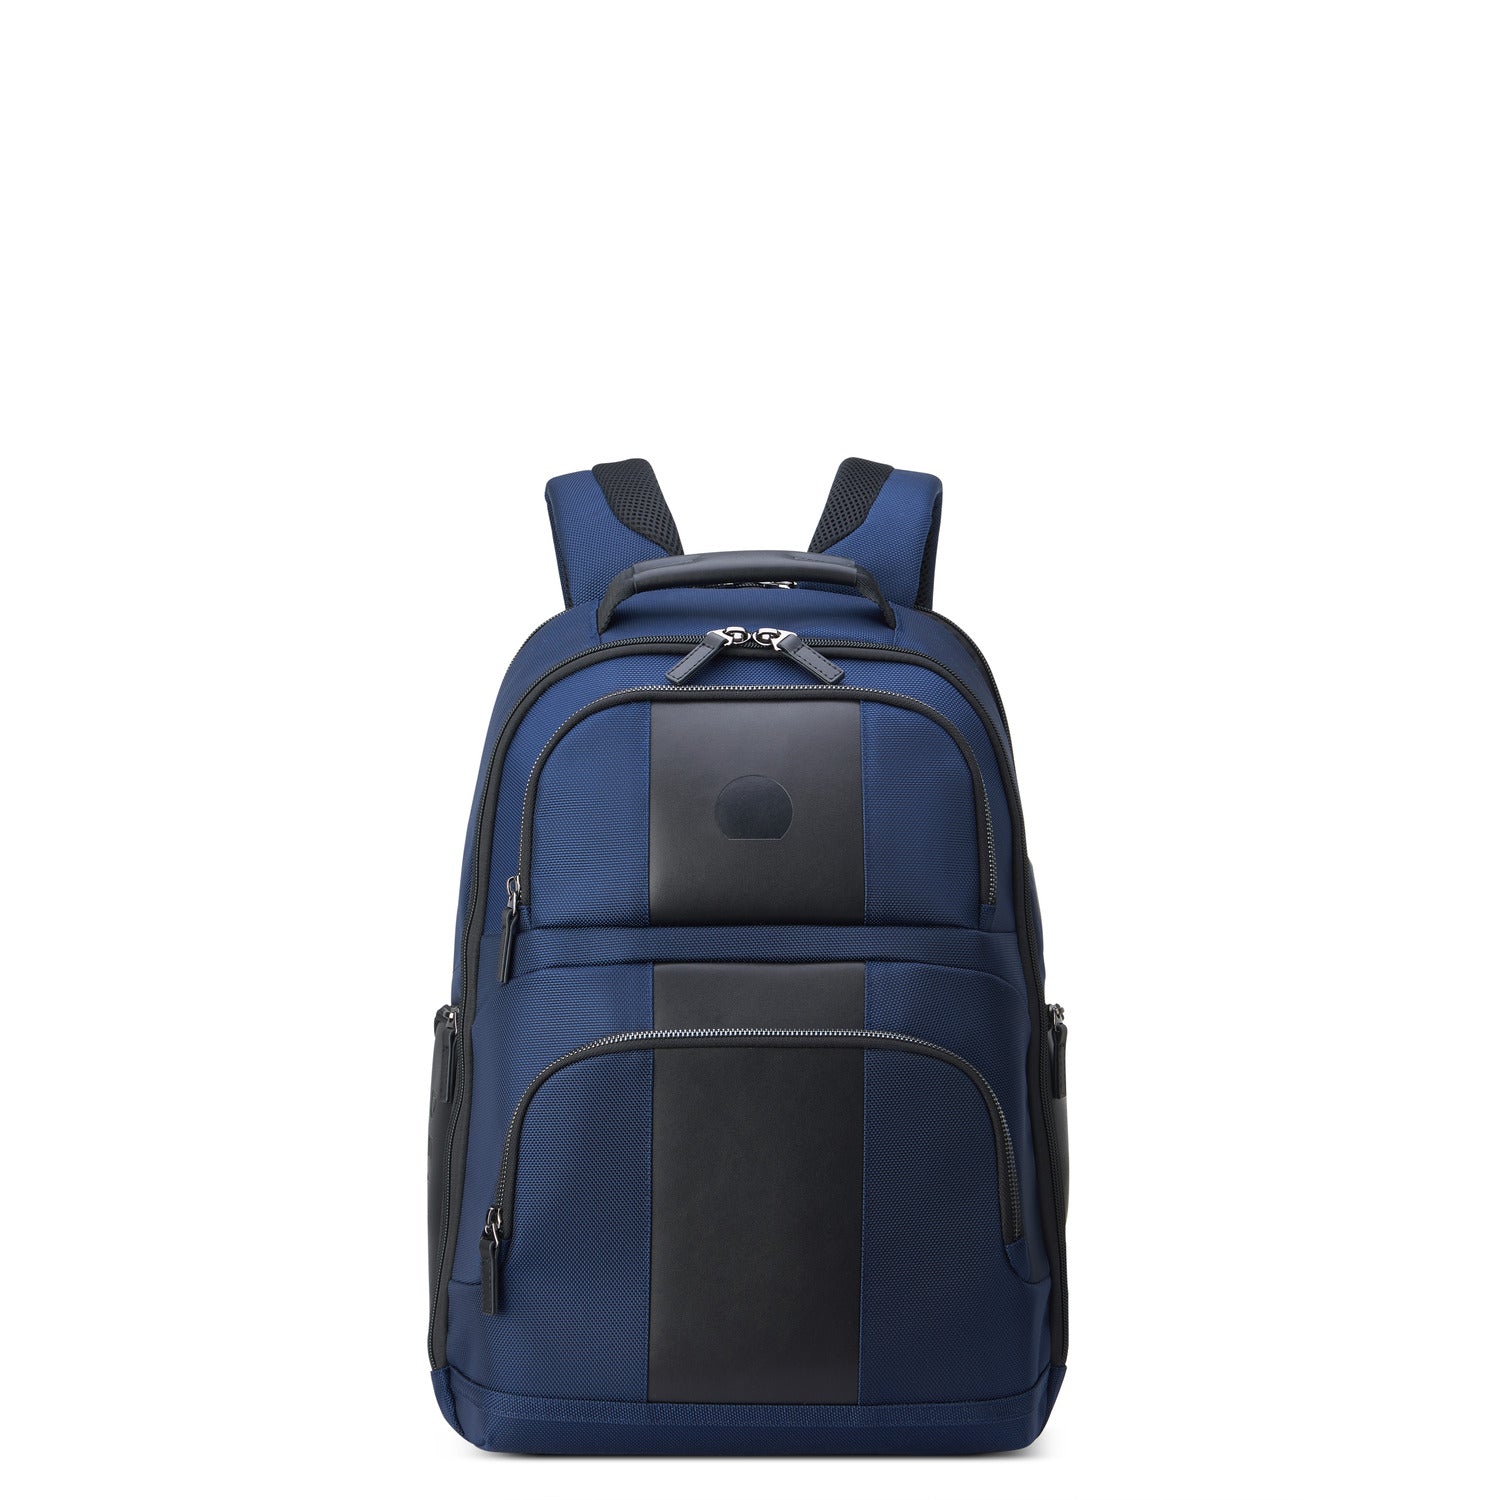 Delsey Wagram Compartment Backpack Laptop  15.6 inch Navy Blue - 00119961002